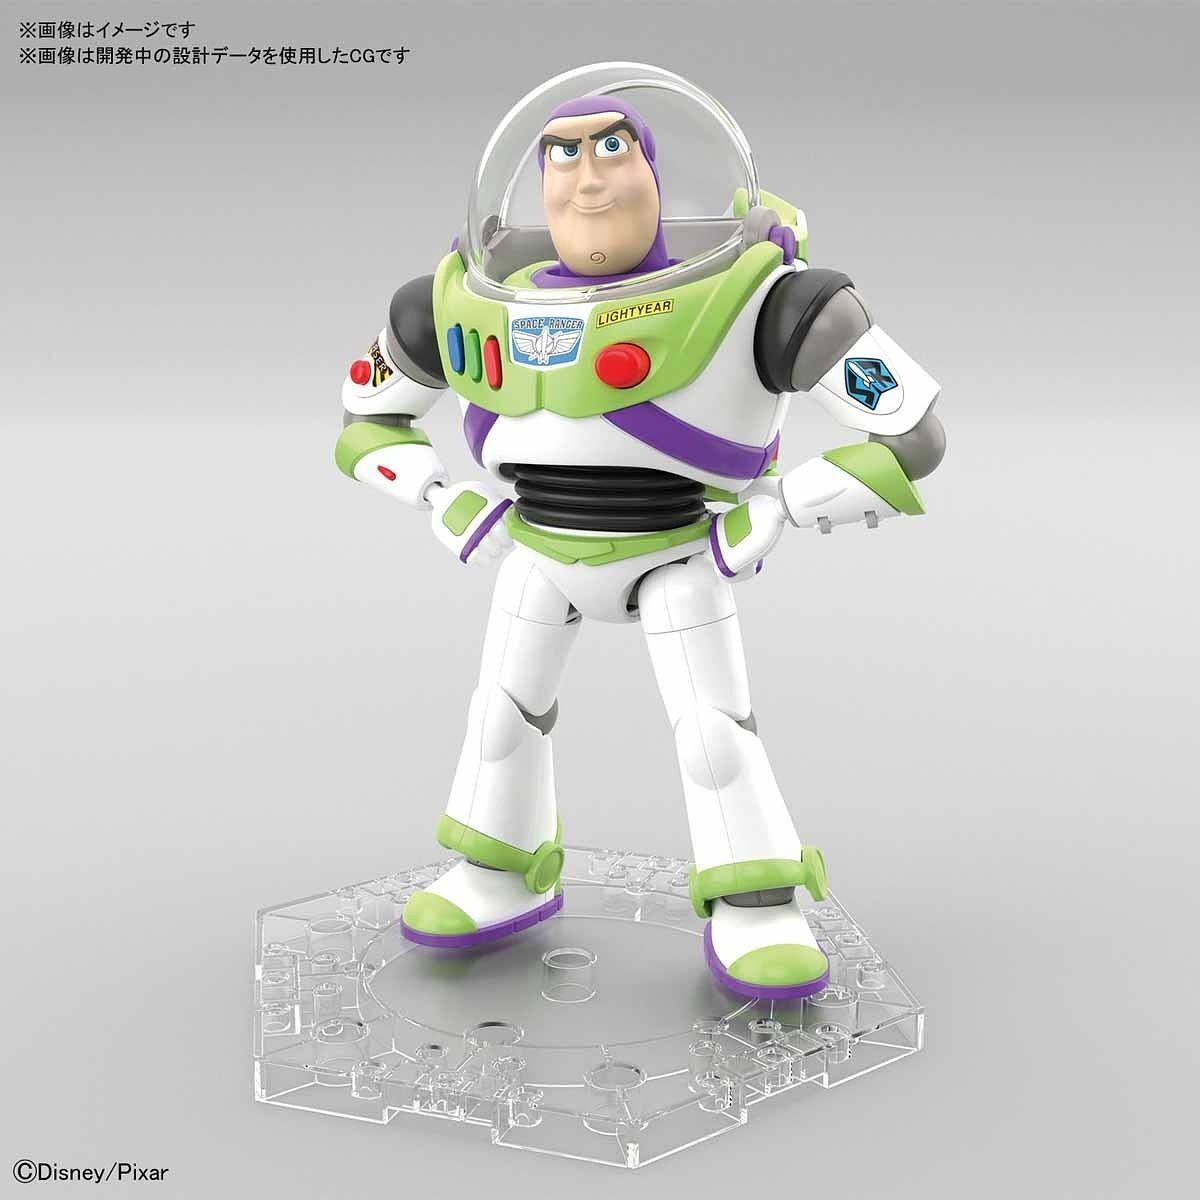 download buzz the lightyear toy